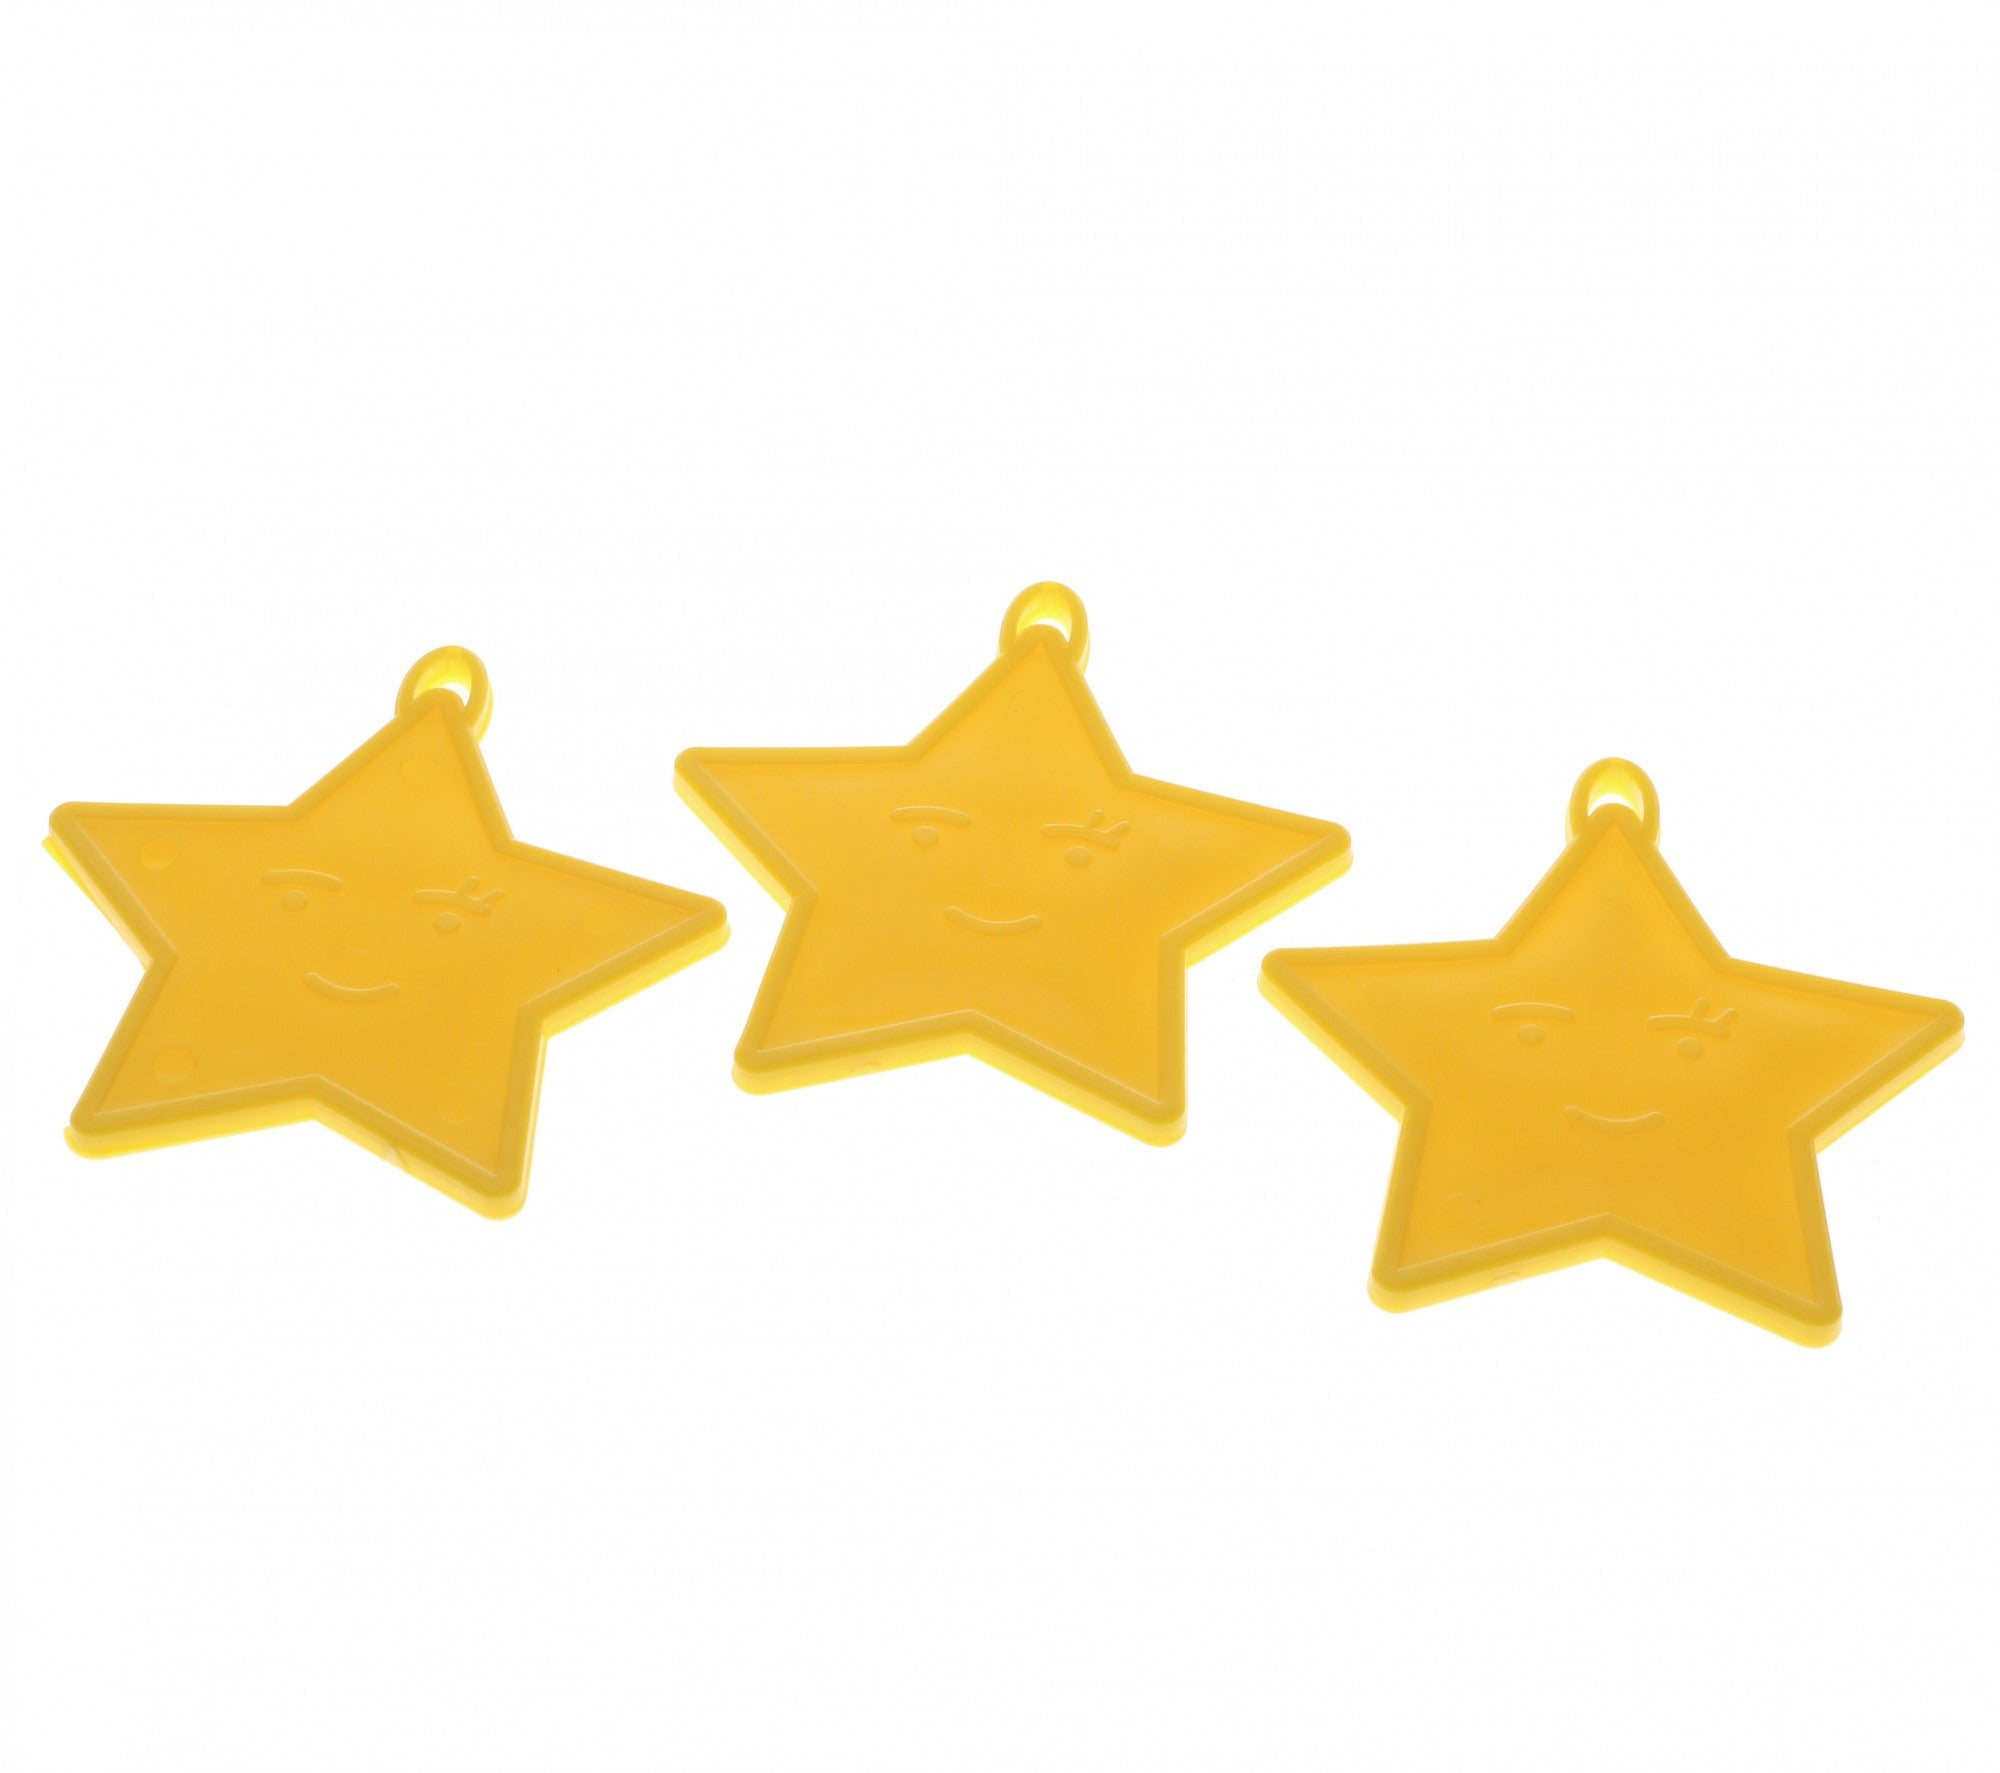 View Primary Yellow Star Shape Weights x50 information